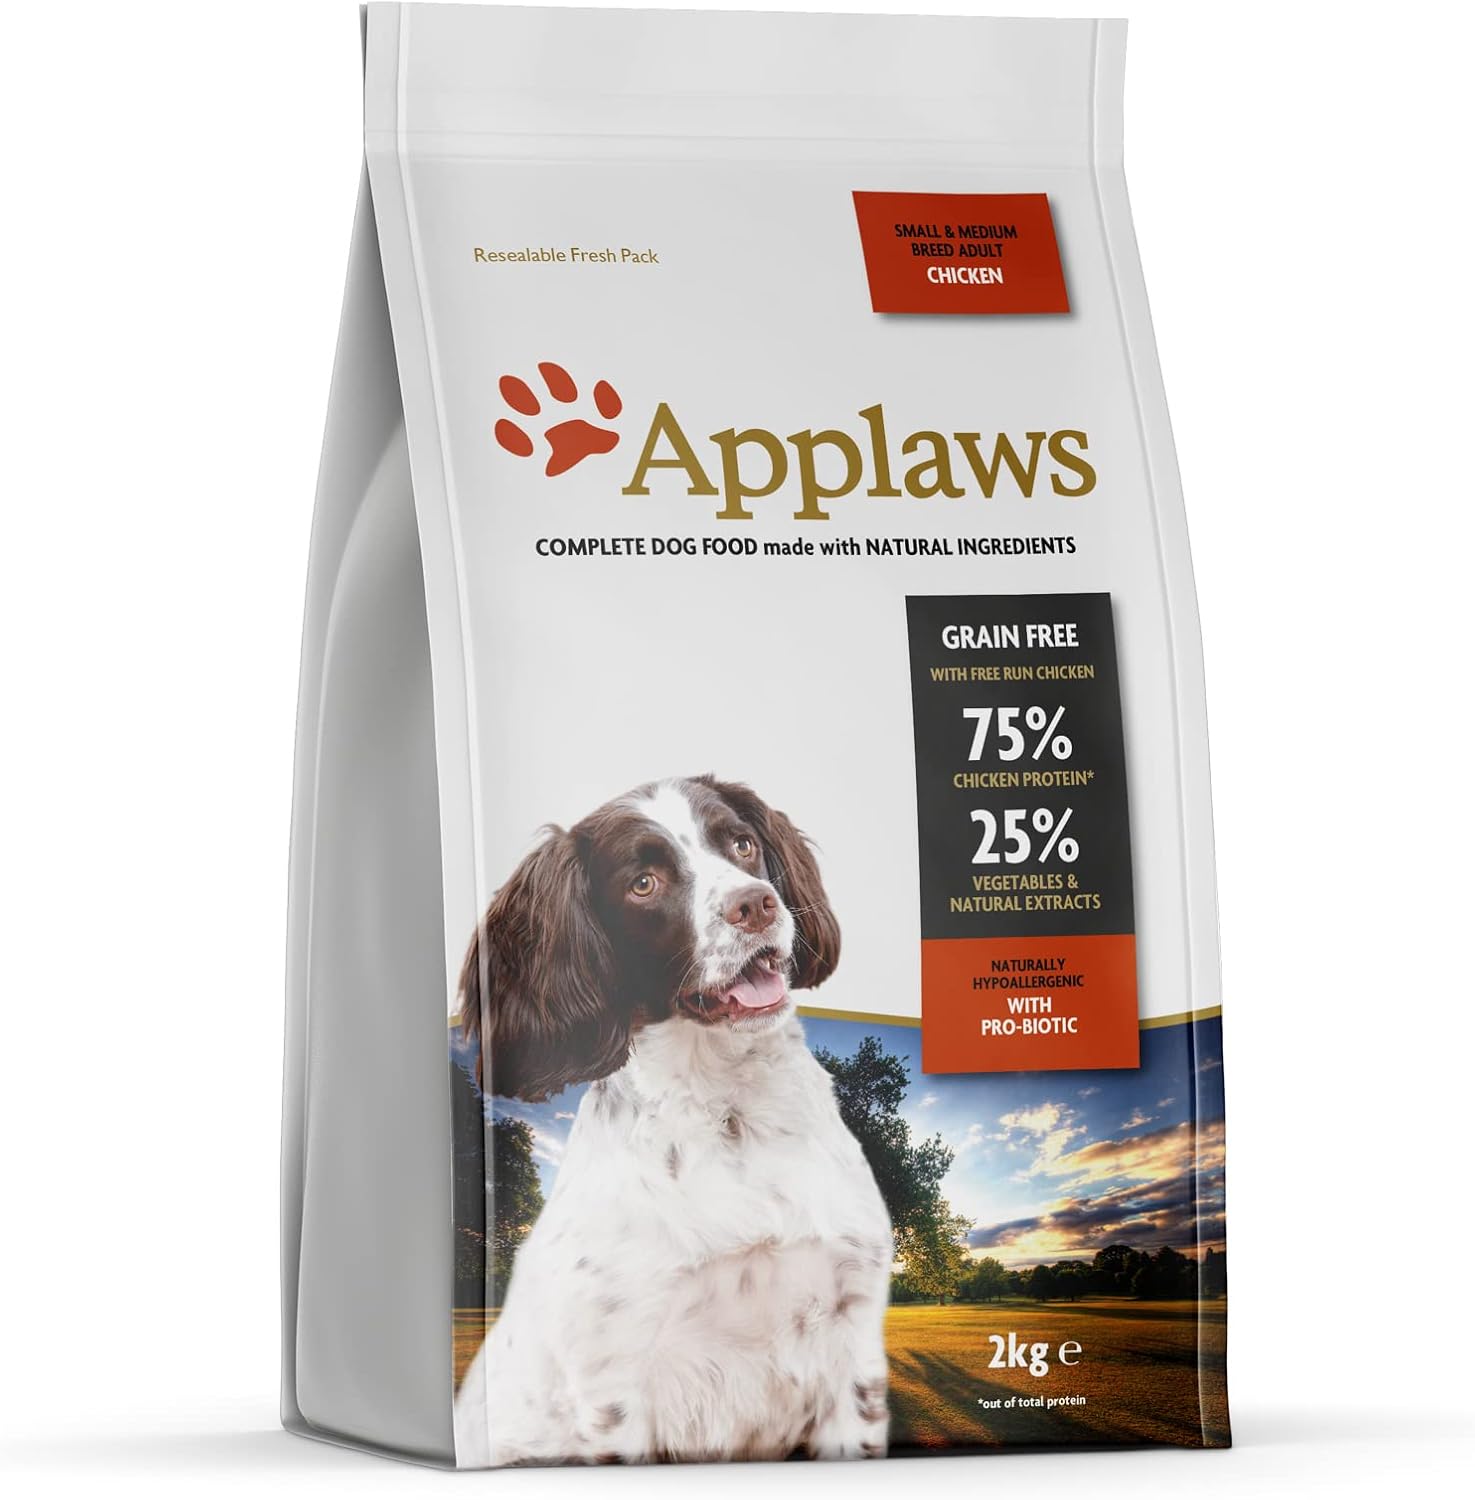 Applaws Complete and Grain Free Dry Dog Food for Adult Medium and Small Dogs, Chicken, 2kg (Pack of 1)?9100942